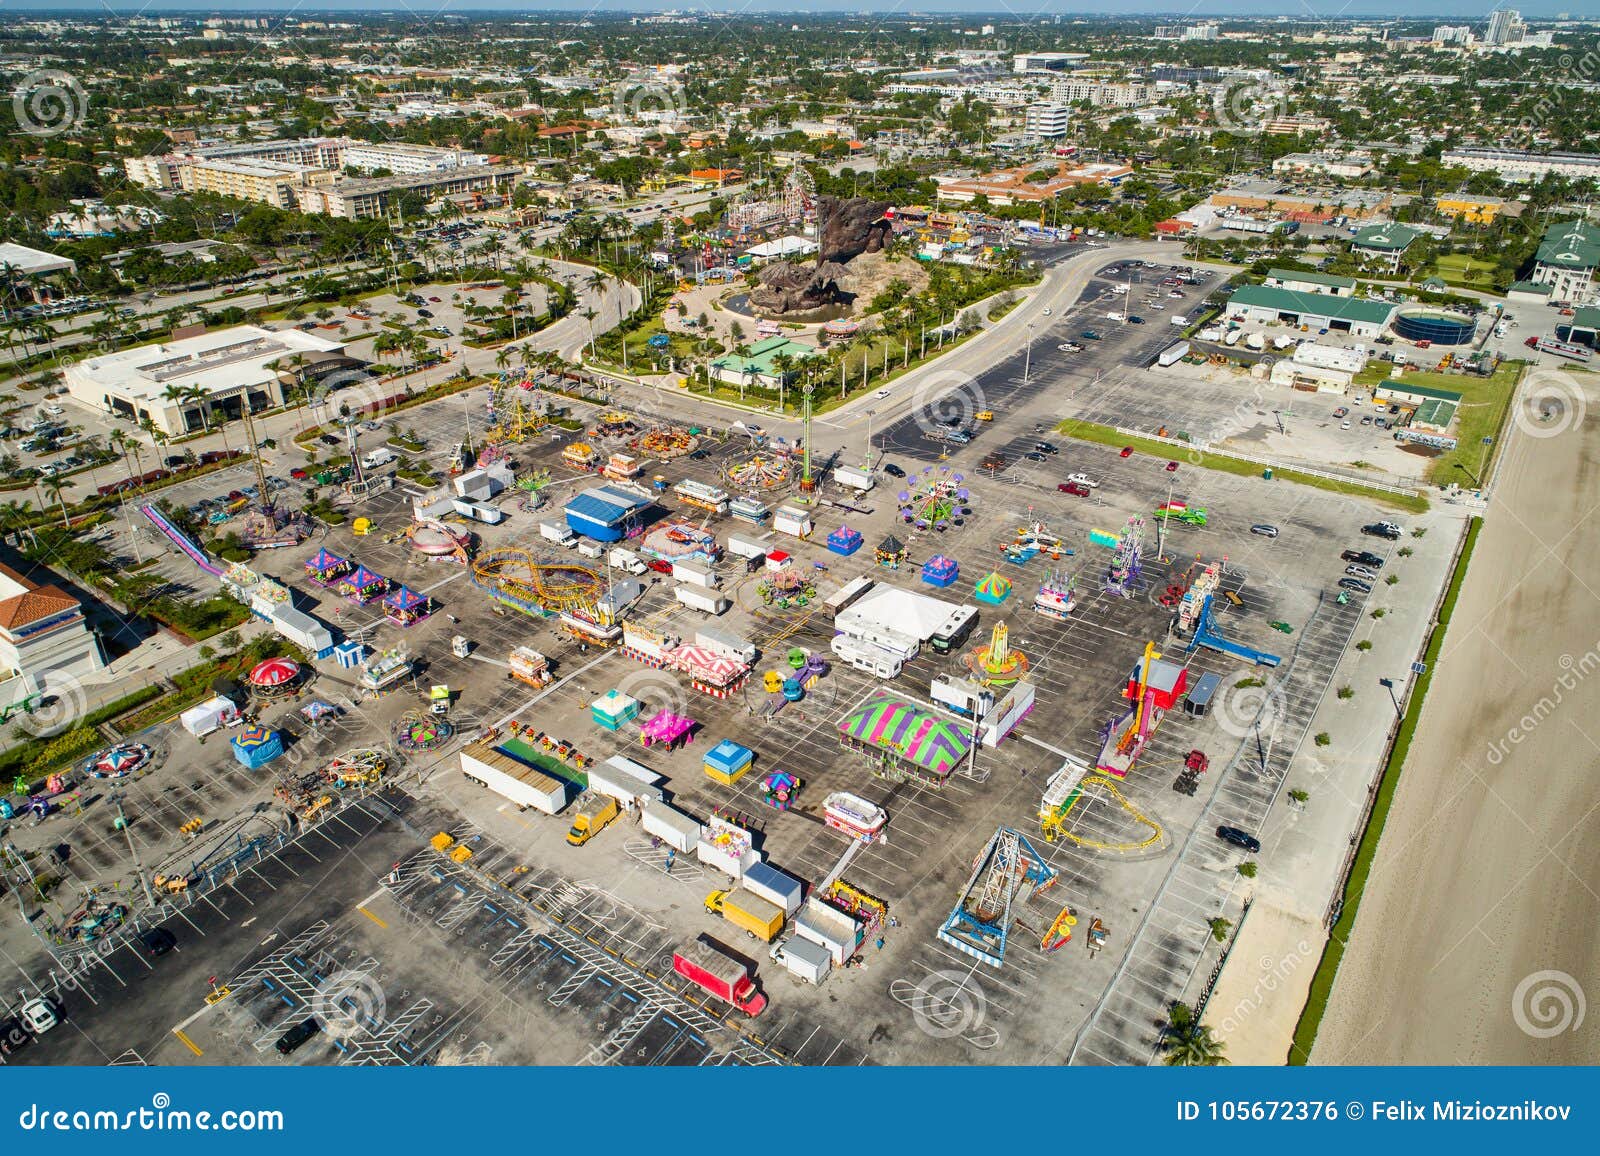 aerial image of the broward county fair and expo